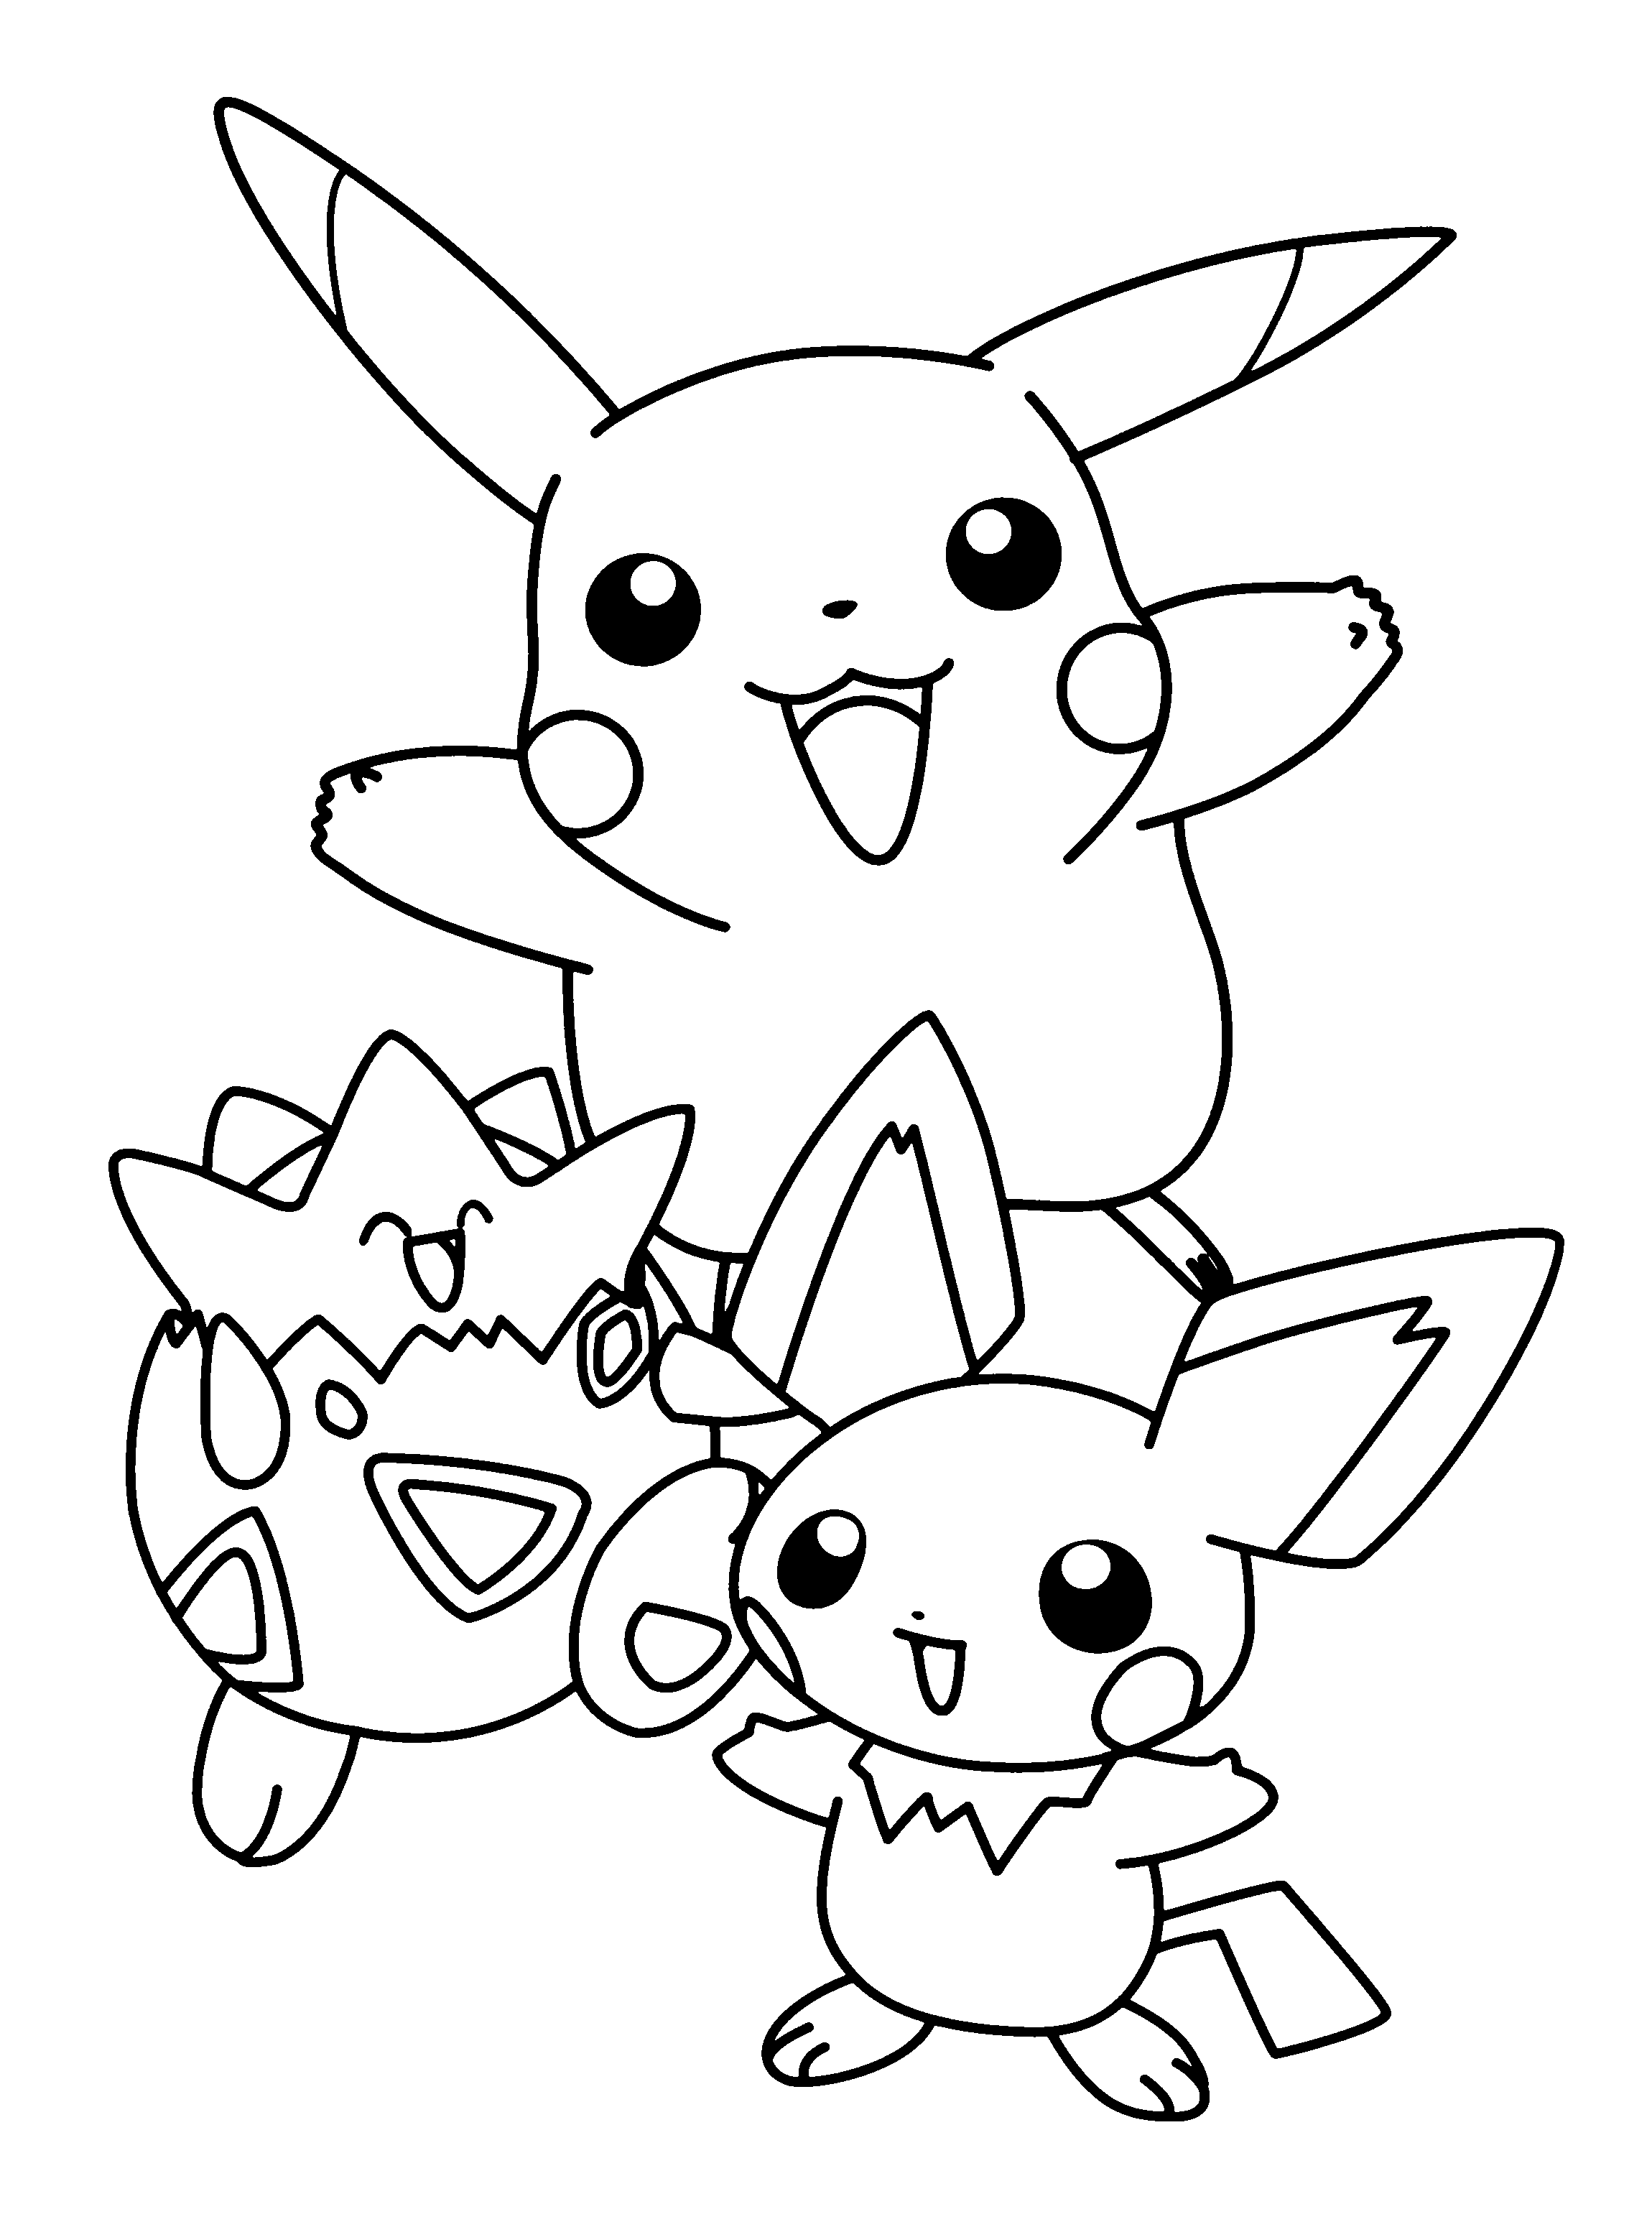 Pokemons 4 Cool Coloring Page